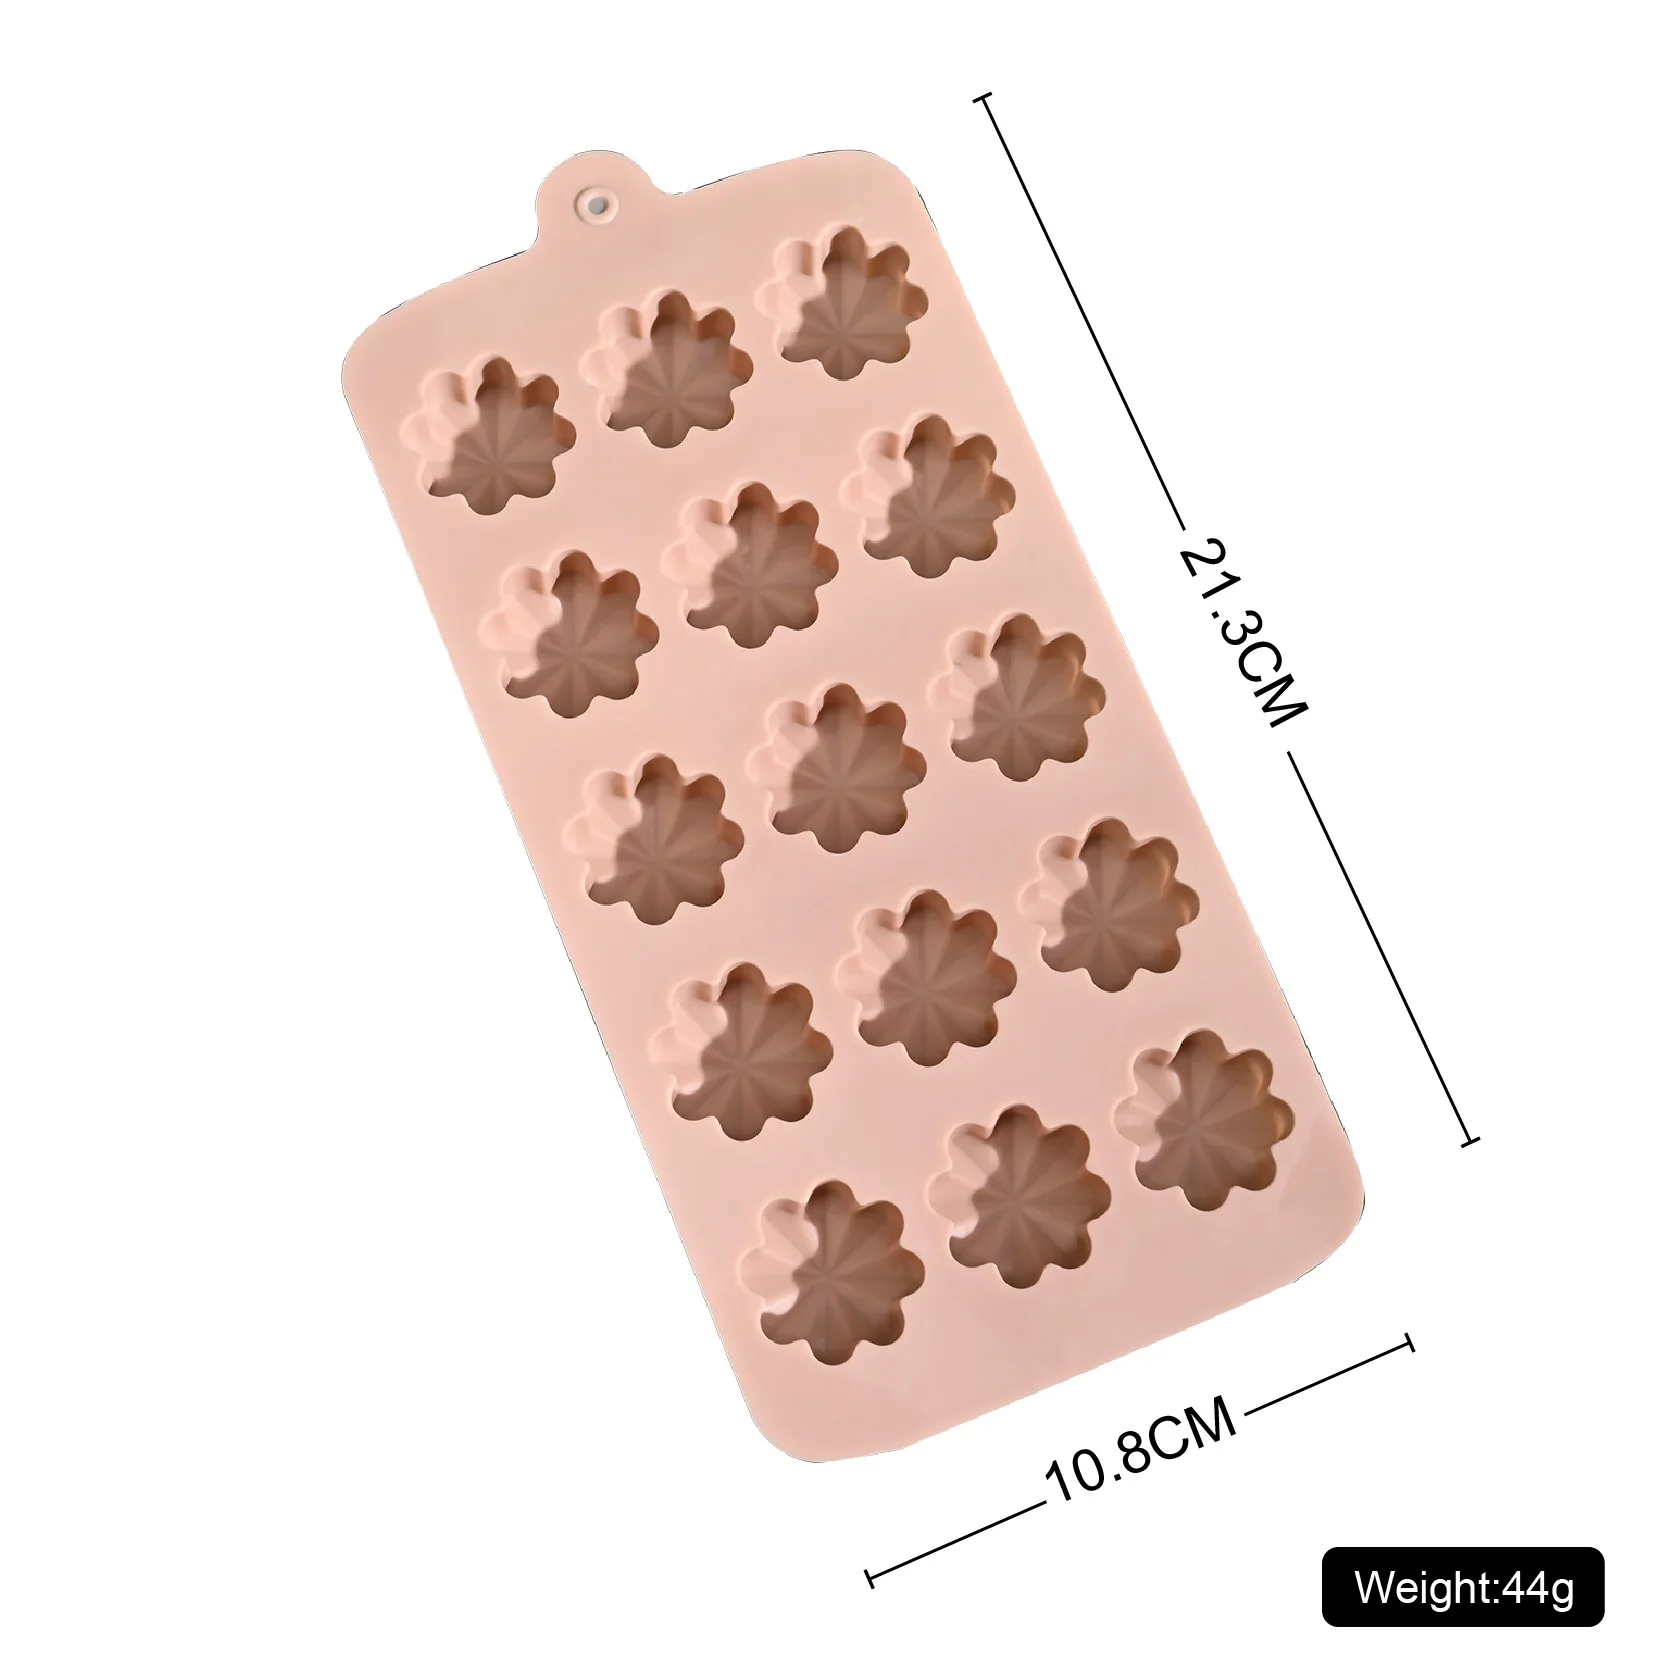 Reusable 15 Cavity Flower Shaped Silicone Chocolate Mold Kitchen Baking Tool With Color Card Package